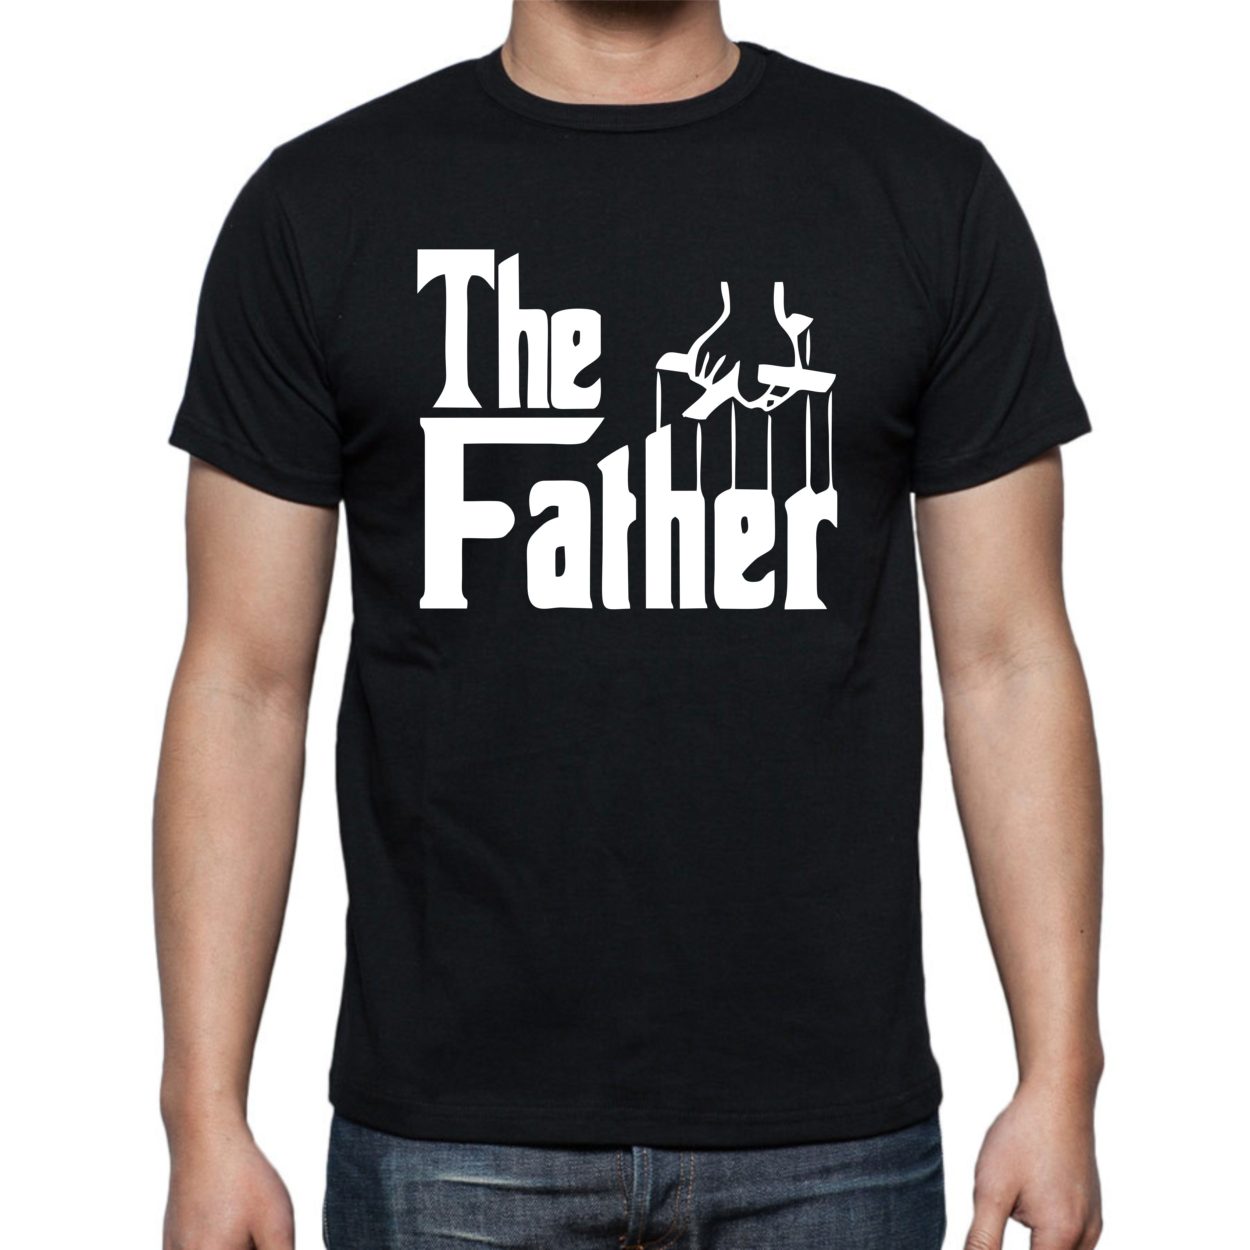 The Father, The Son, The Daughter - NJ Printing & Embroidery LLC